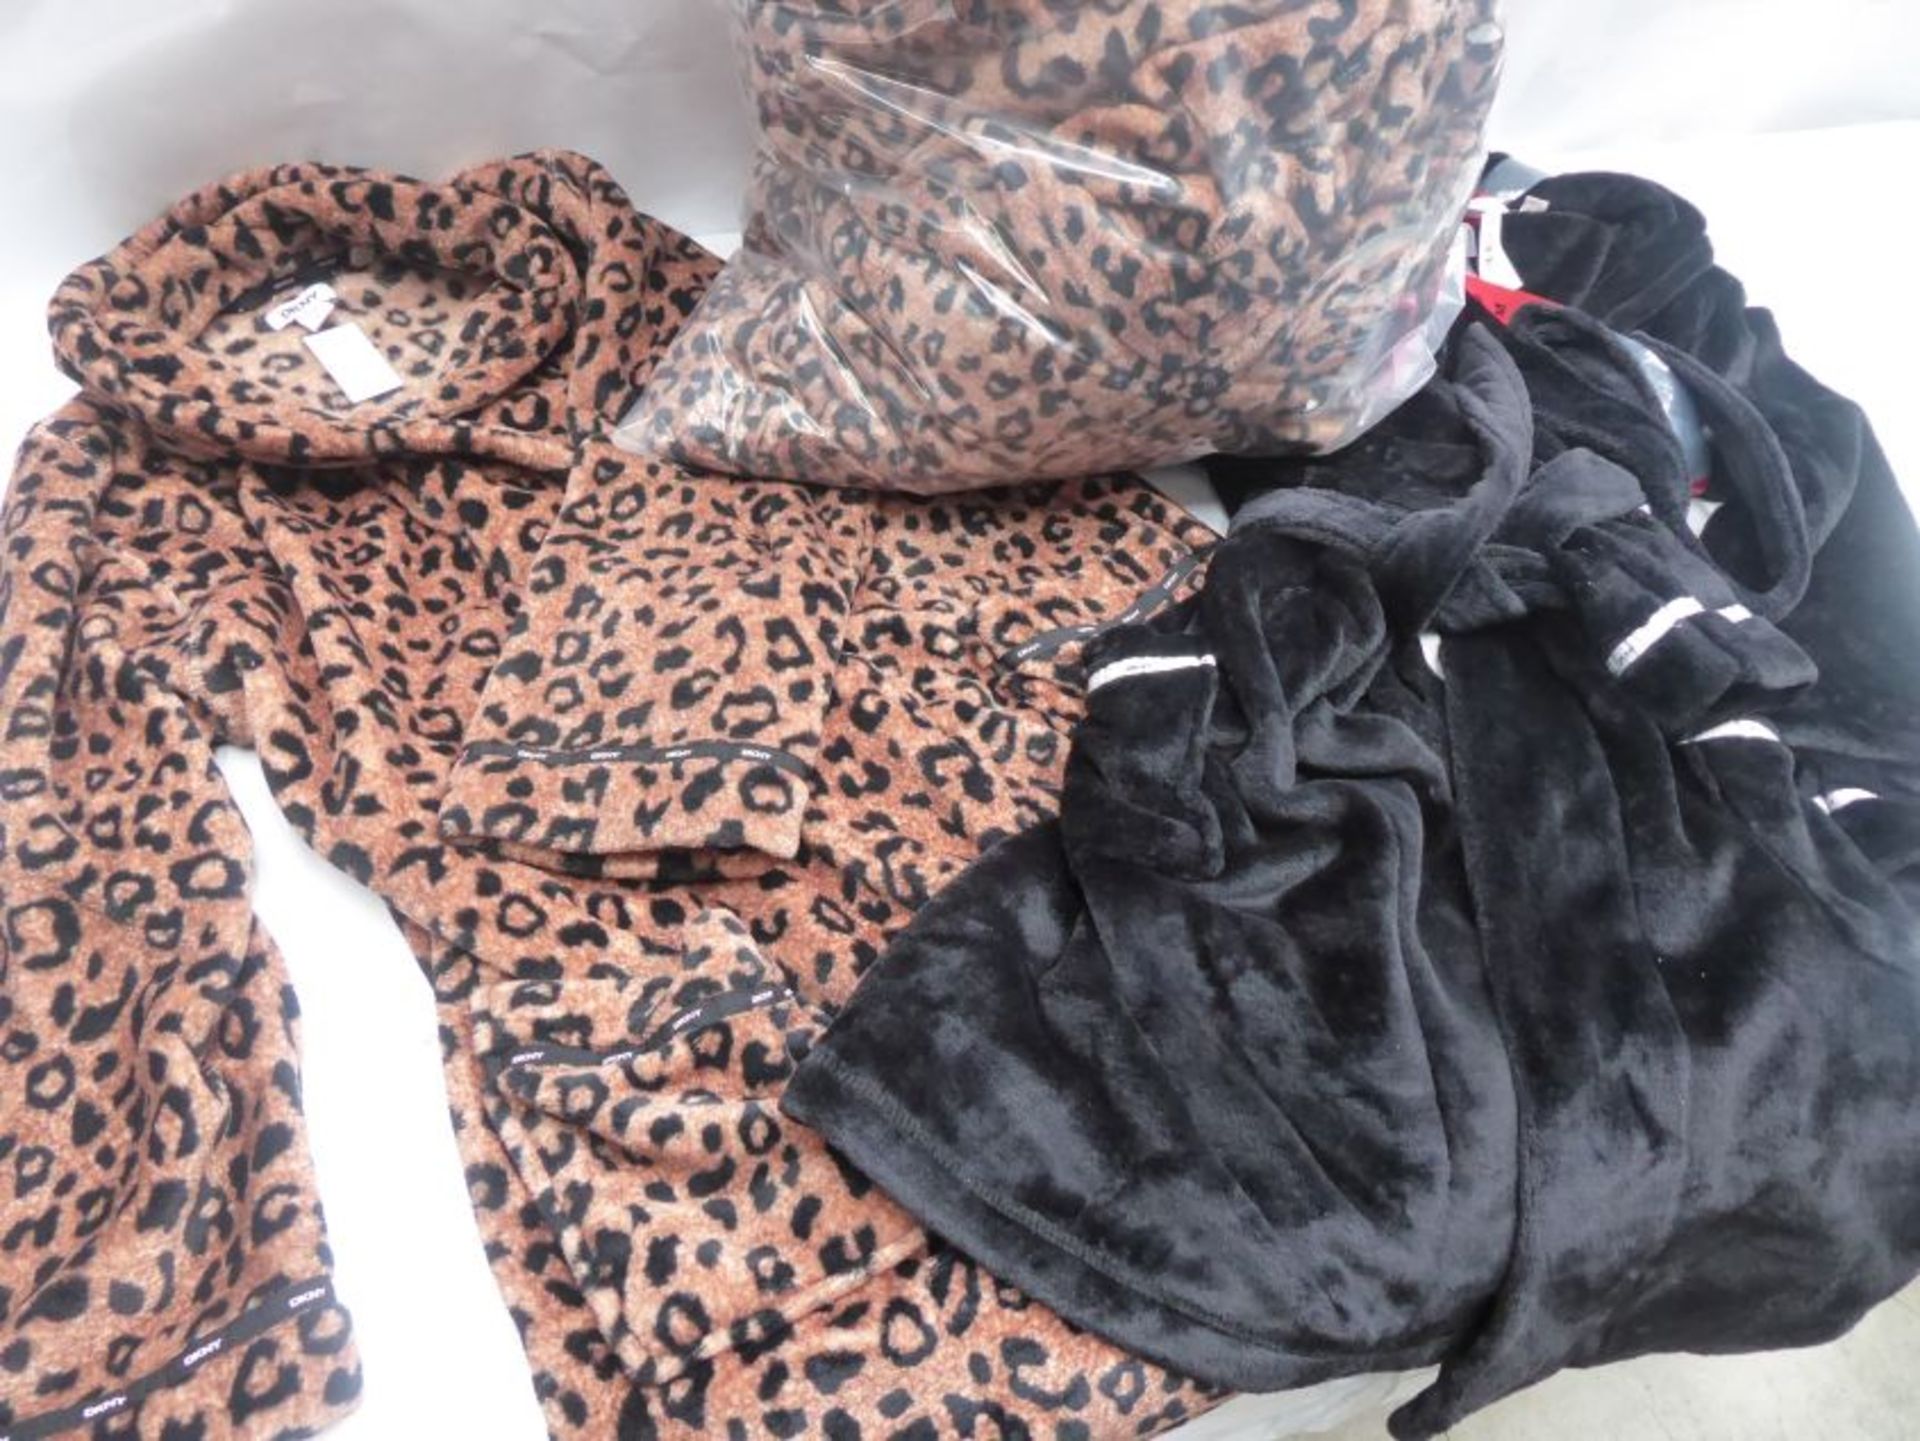 Bag containing 6 leopard print dressing gowns and a black dressing gown by DKNY, size S-M - Image 2 of 2